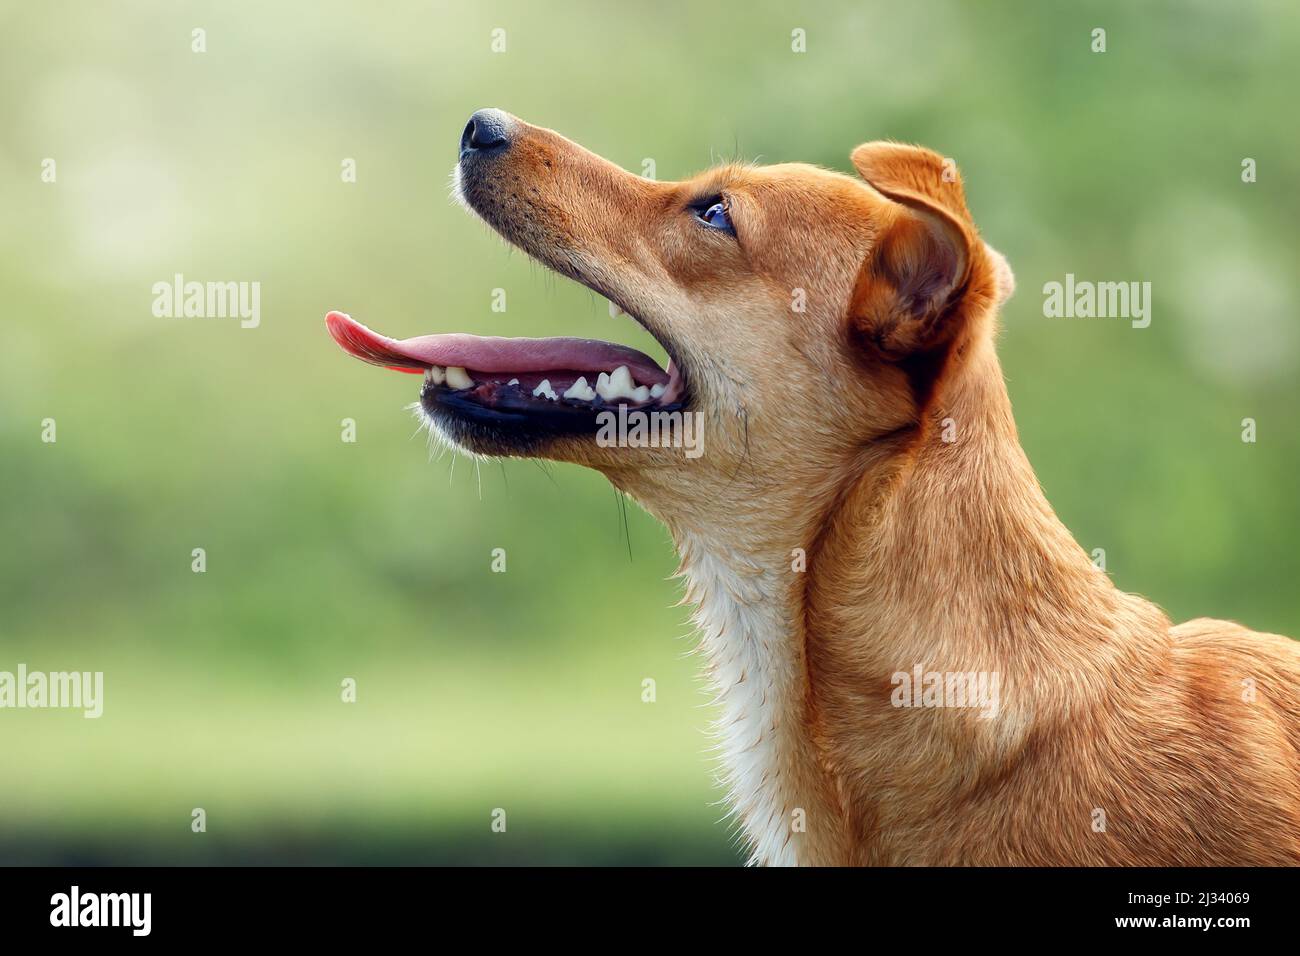 Lovely orange dog portrait from side with an open mouth, showing tongue and teeth. Puppy is waiting for something tasty. Stock Photo